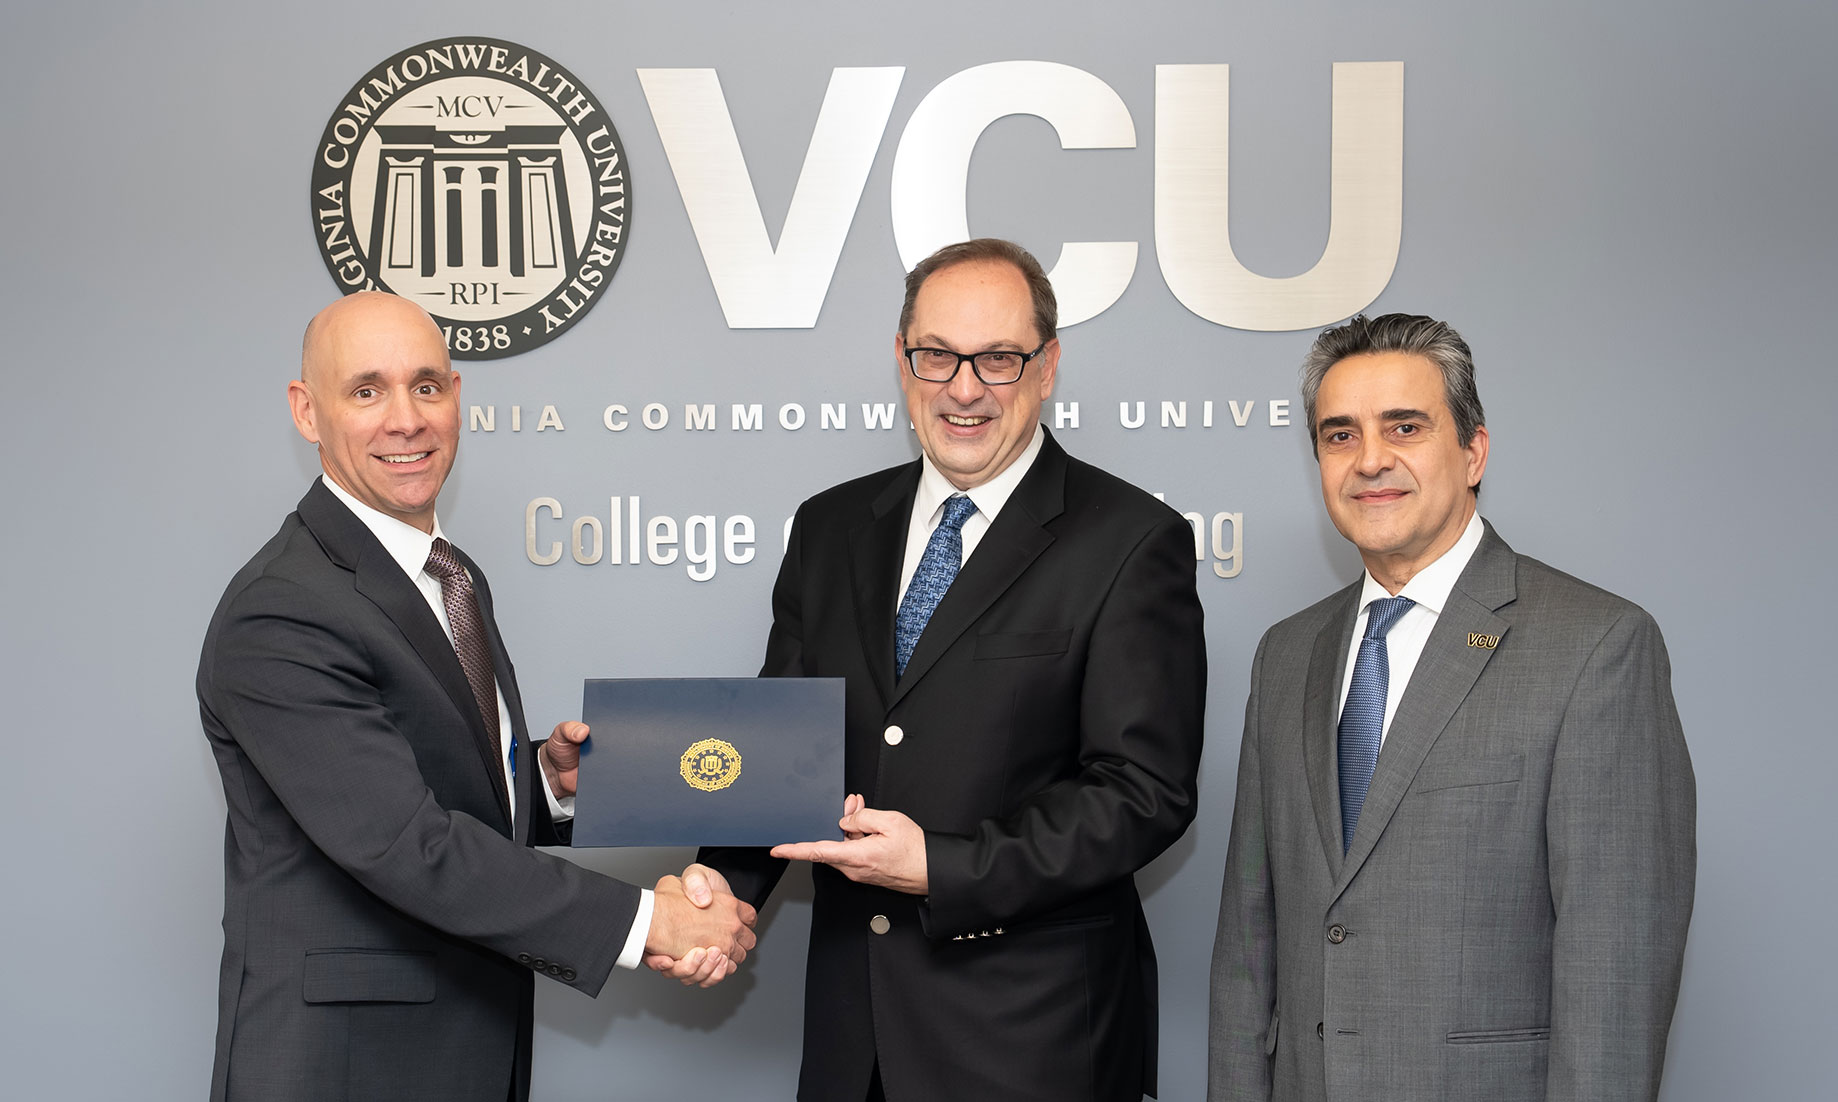 Milos Manic, Ph.D., computer science professor, (center) with Stanley M. Meador, special agent in charge of the FBI Richmond Field Office, (left) and Azim Eskandarian, D.Sc., the Alice T. and William H. Goodwin Jr. Dean of the VCU College of Engineering (right)